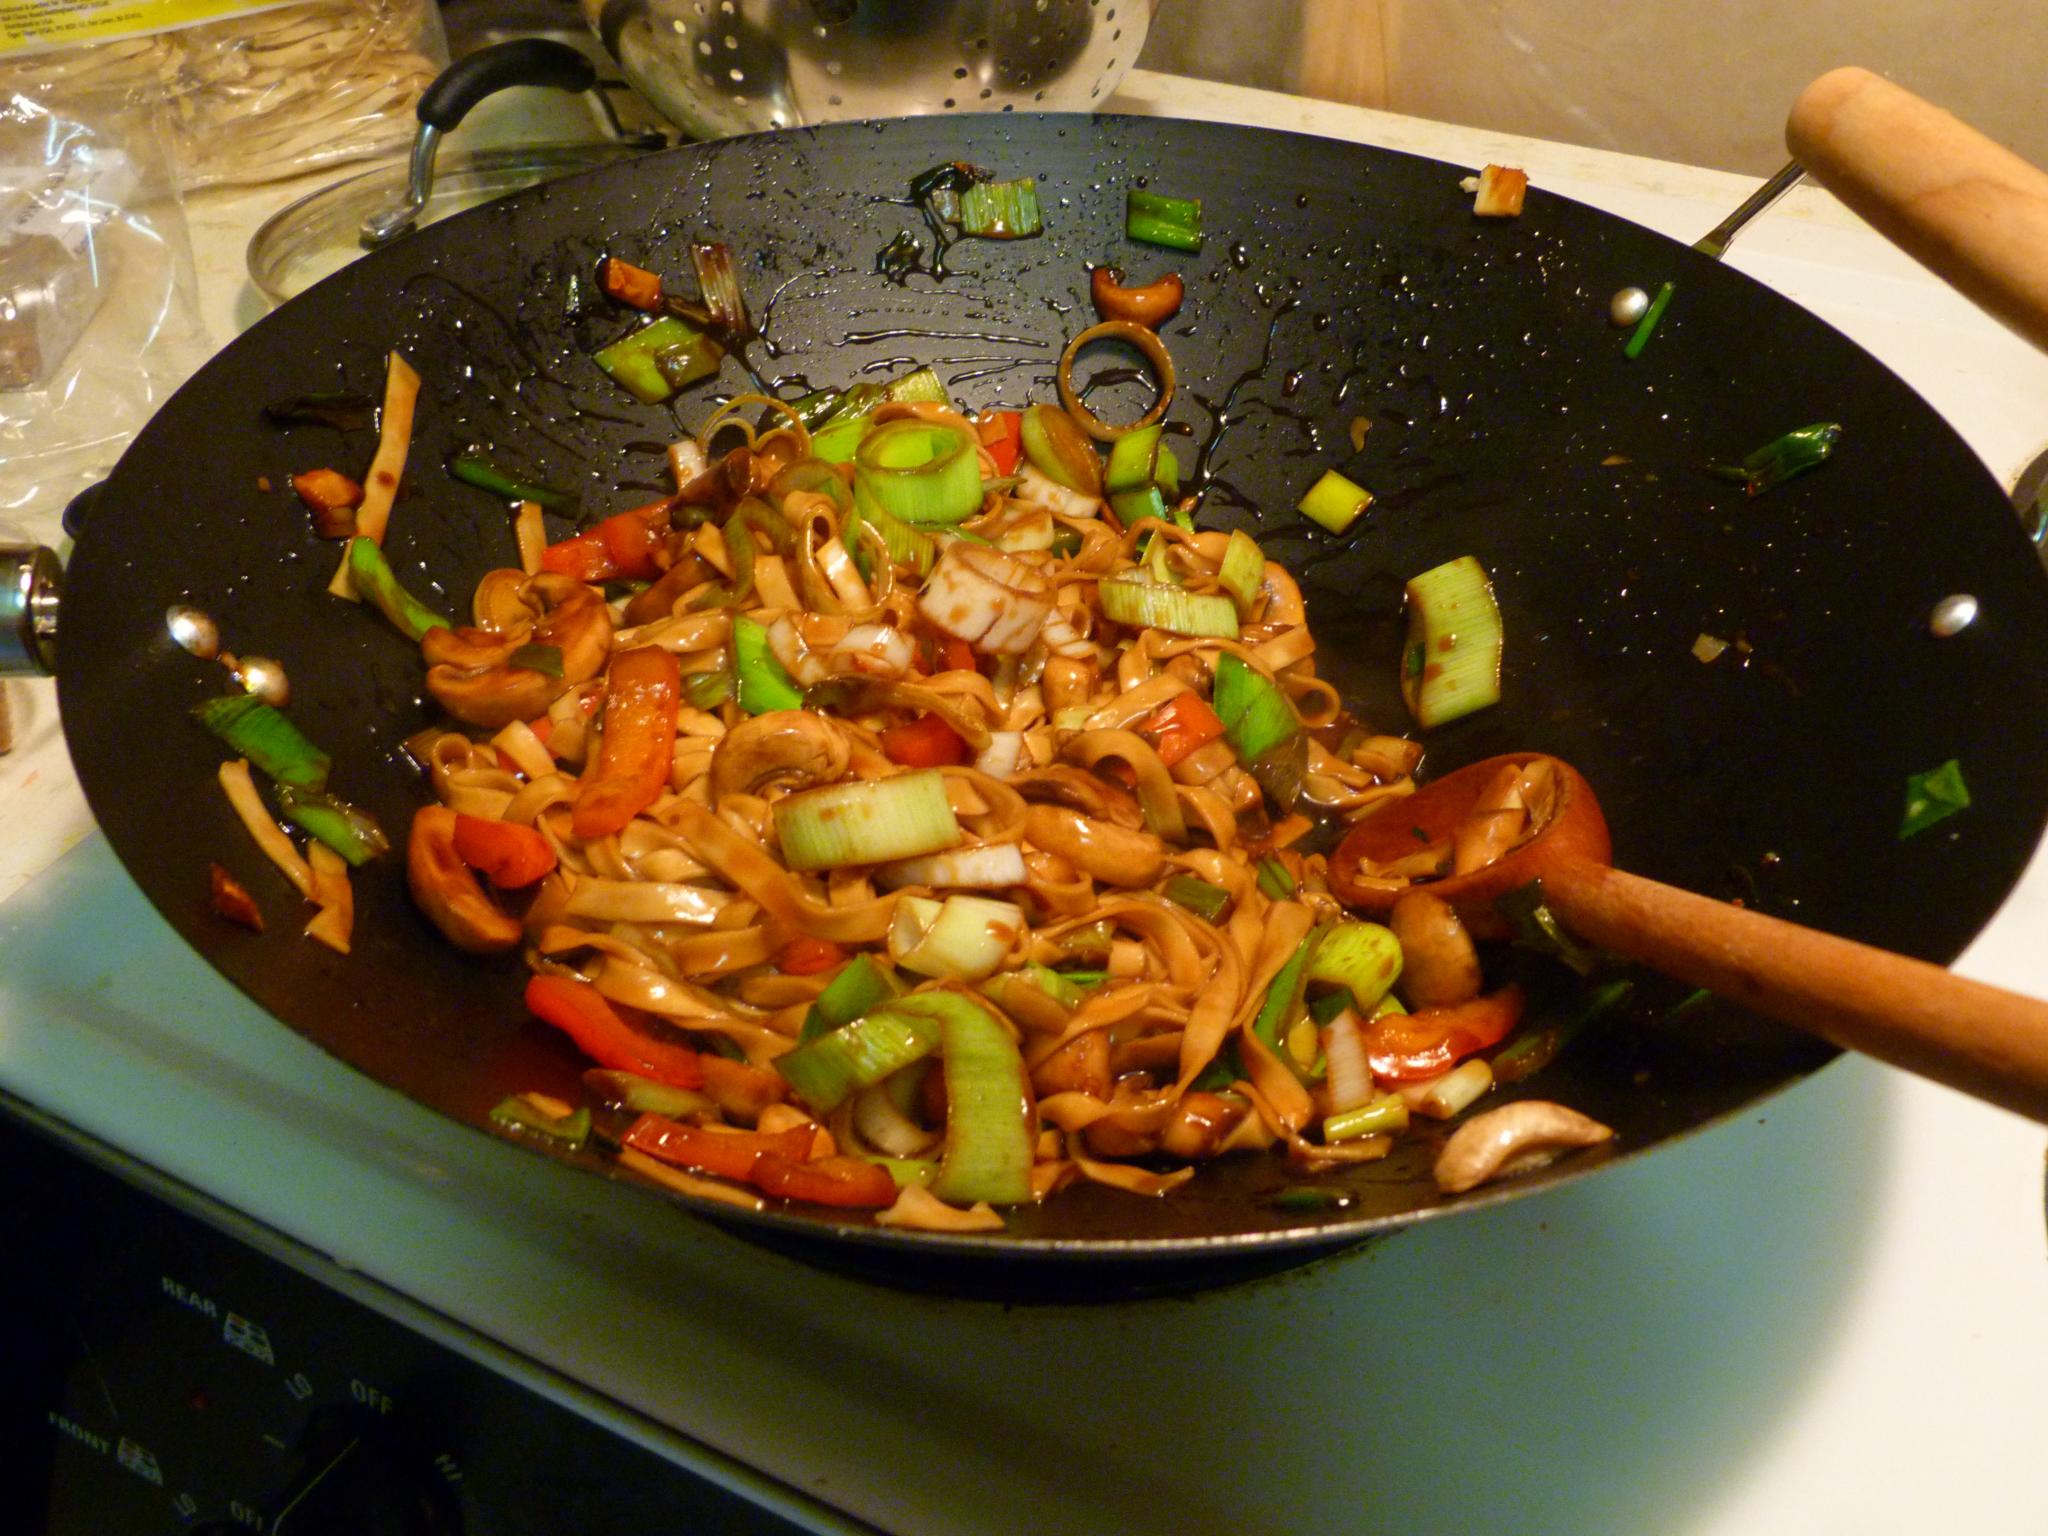 asian food being cooked in a wok on a kitchen stove